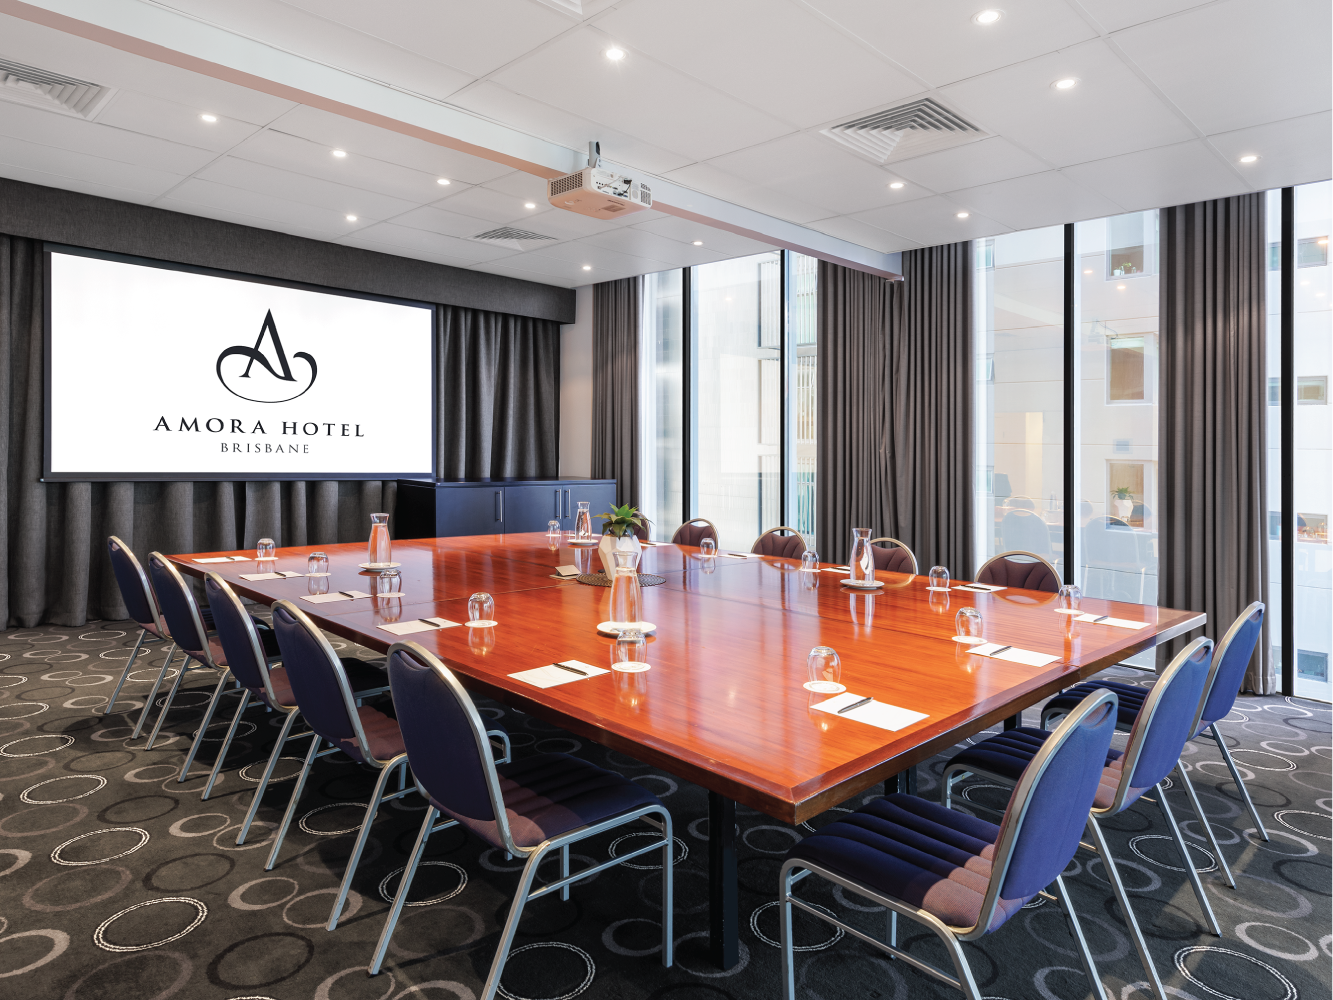 Well arranged meeting setup in Dobson Room at Amora Hotel